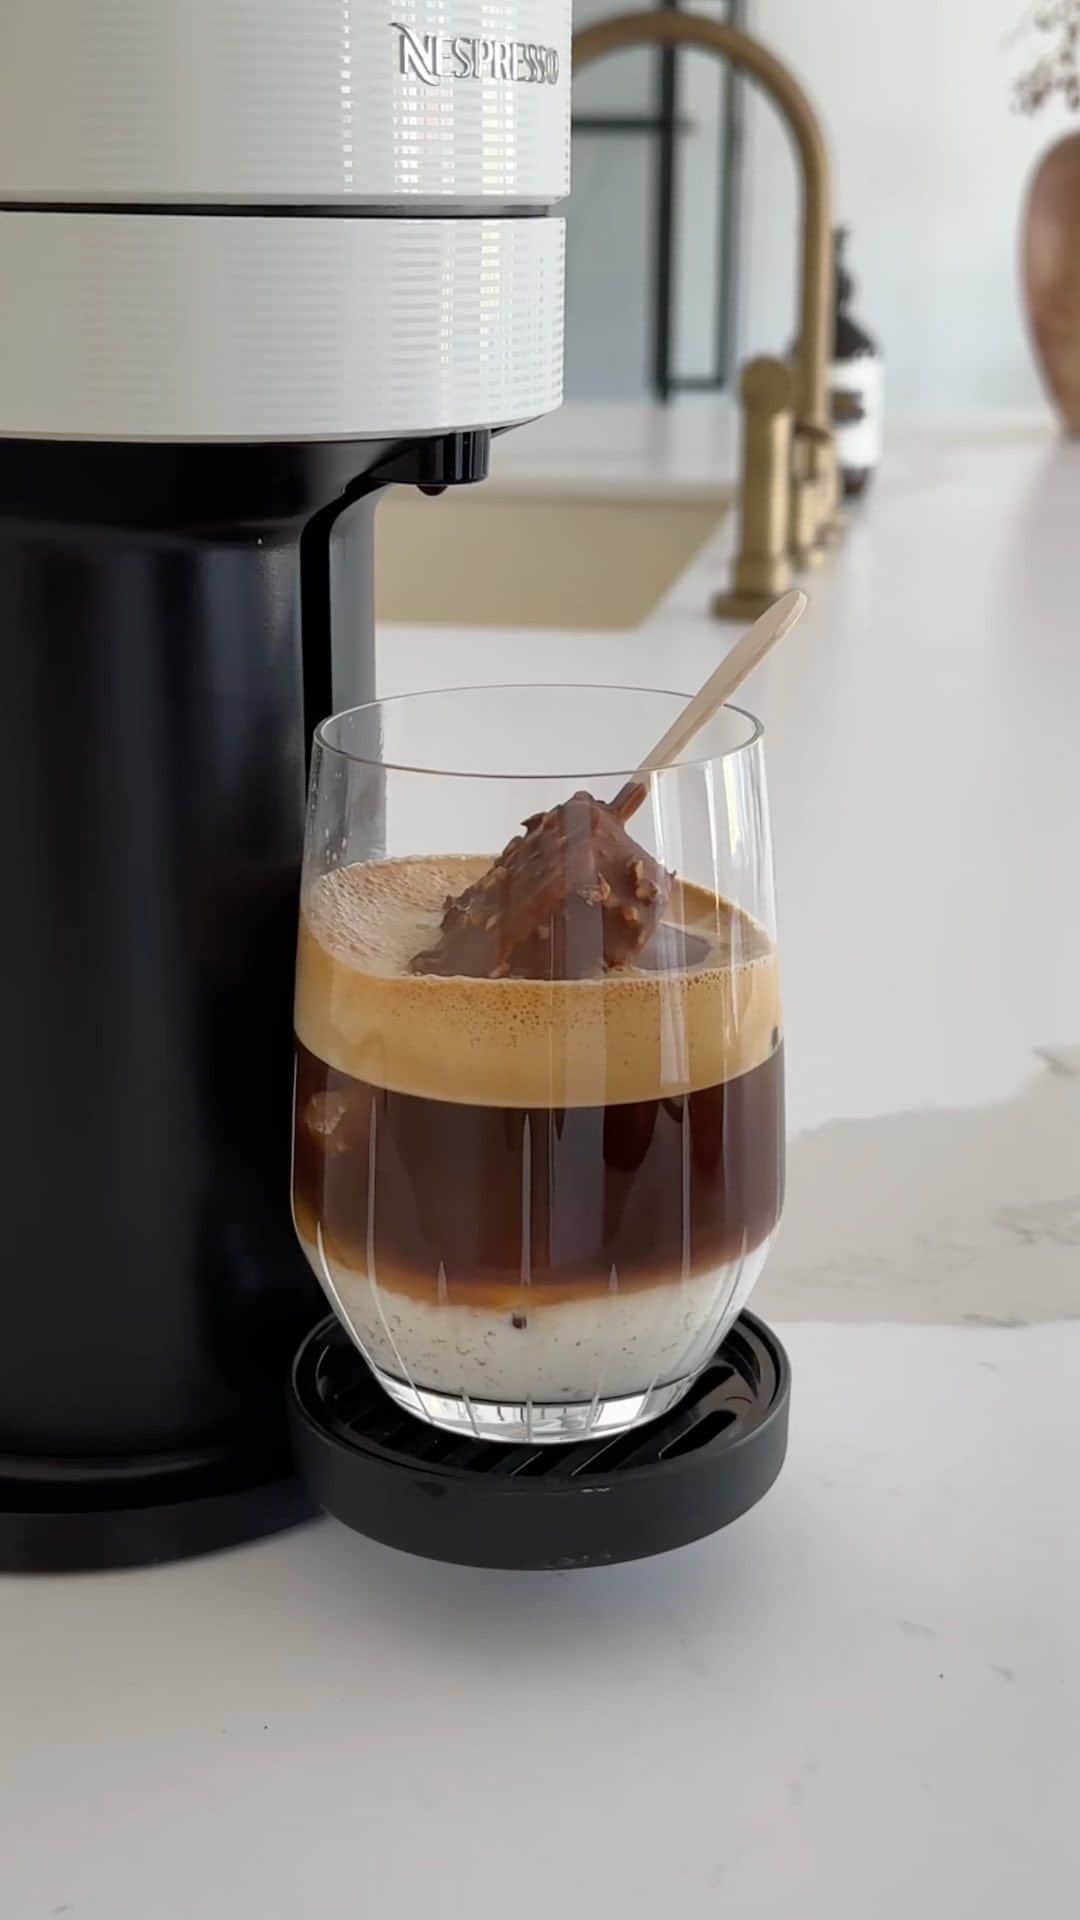 Nespressoのインスタグラム：「Yes, you can and yes, you should. Get ready to indulge with the Ice Cream Bar Latte recipe made with @llesdeux    Here’s what you will need:   ·  1 mini Ice Cream Bar Latte ·  150ml of Arondio Coffee ·  200ml of cold 3.5% Milk ·  Ice cubes ·  Vertuo Next ·  Barista Milk Device ·  Cold Reveal Glass   Here’s how to do it:   1.  Pour 100 ml of milk 3.5% directly into the espresso Barista device or Aeroccino. 2.  Close the lid, select the “Espresso on Ice Macchiato” recipe on the device and press the start button. 3.  In Cold reveal Glass, fill up with ice cubes 1/3 of the glass, pour 100ml of cold Milk, put the mini almond/ chocolate ice cream stick on the ice. 5.  Extract 150ml of Arondio Coffee over it. 6.  Pour the cold milk foam till the top of the glass. 7.  Mix it gently with the ice cream & enjoy!  #IceCreamCoffee #NespressoCoffeeCurious #NespressoRecipes #SummerRecipes」